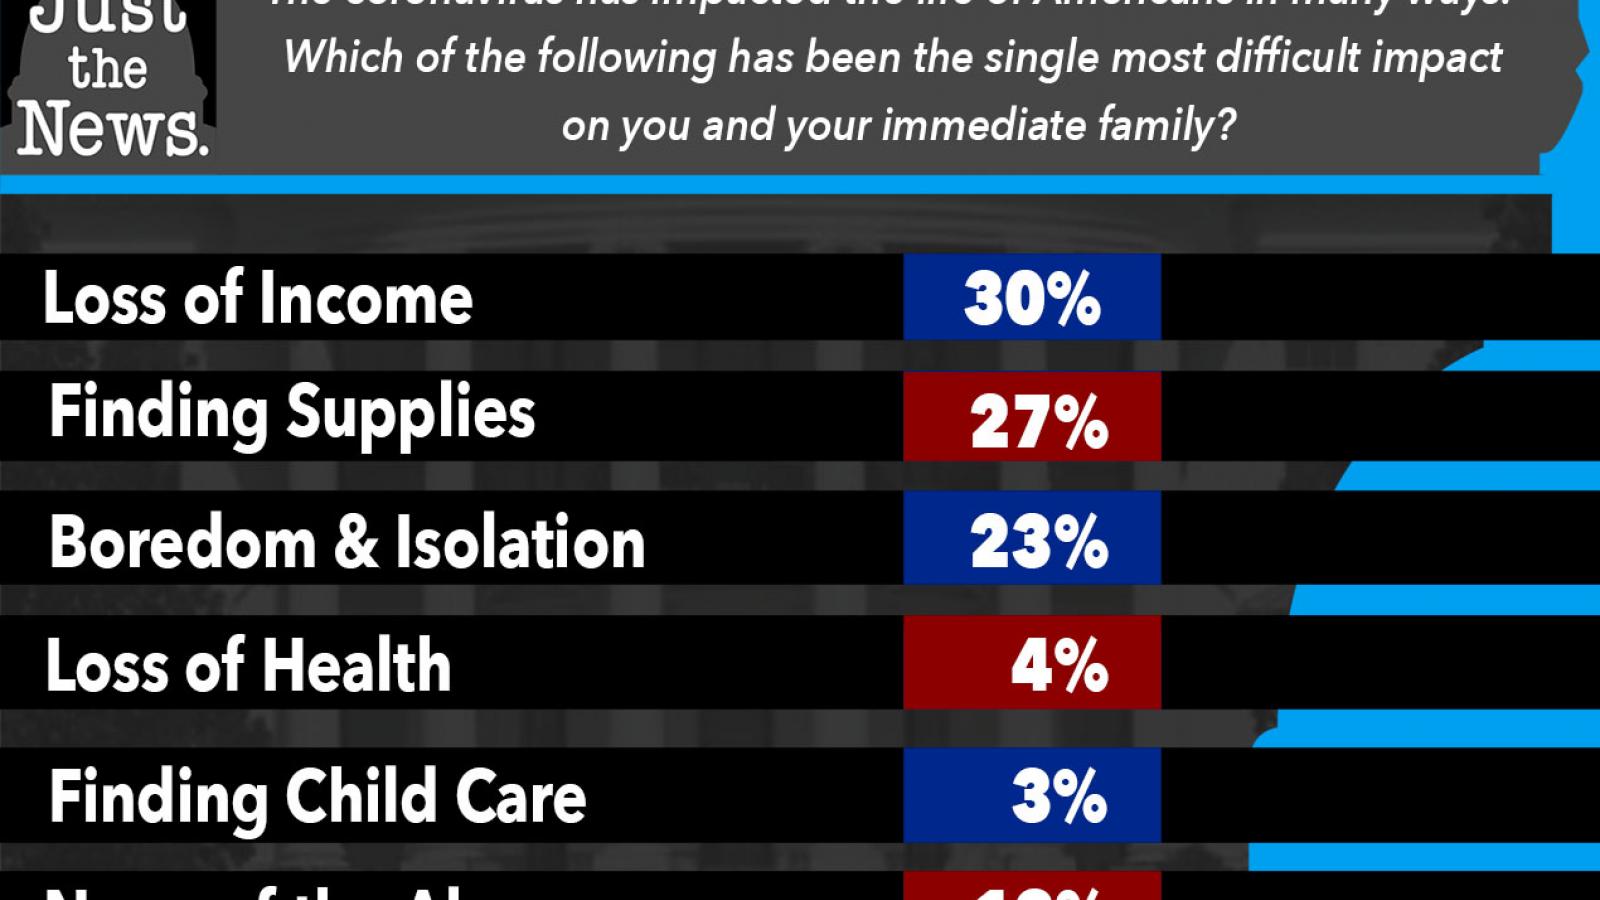 Almost one-third of Americans say that they're worried about loss of income amid the coronavirus pandemic.